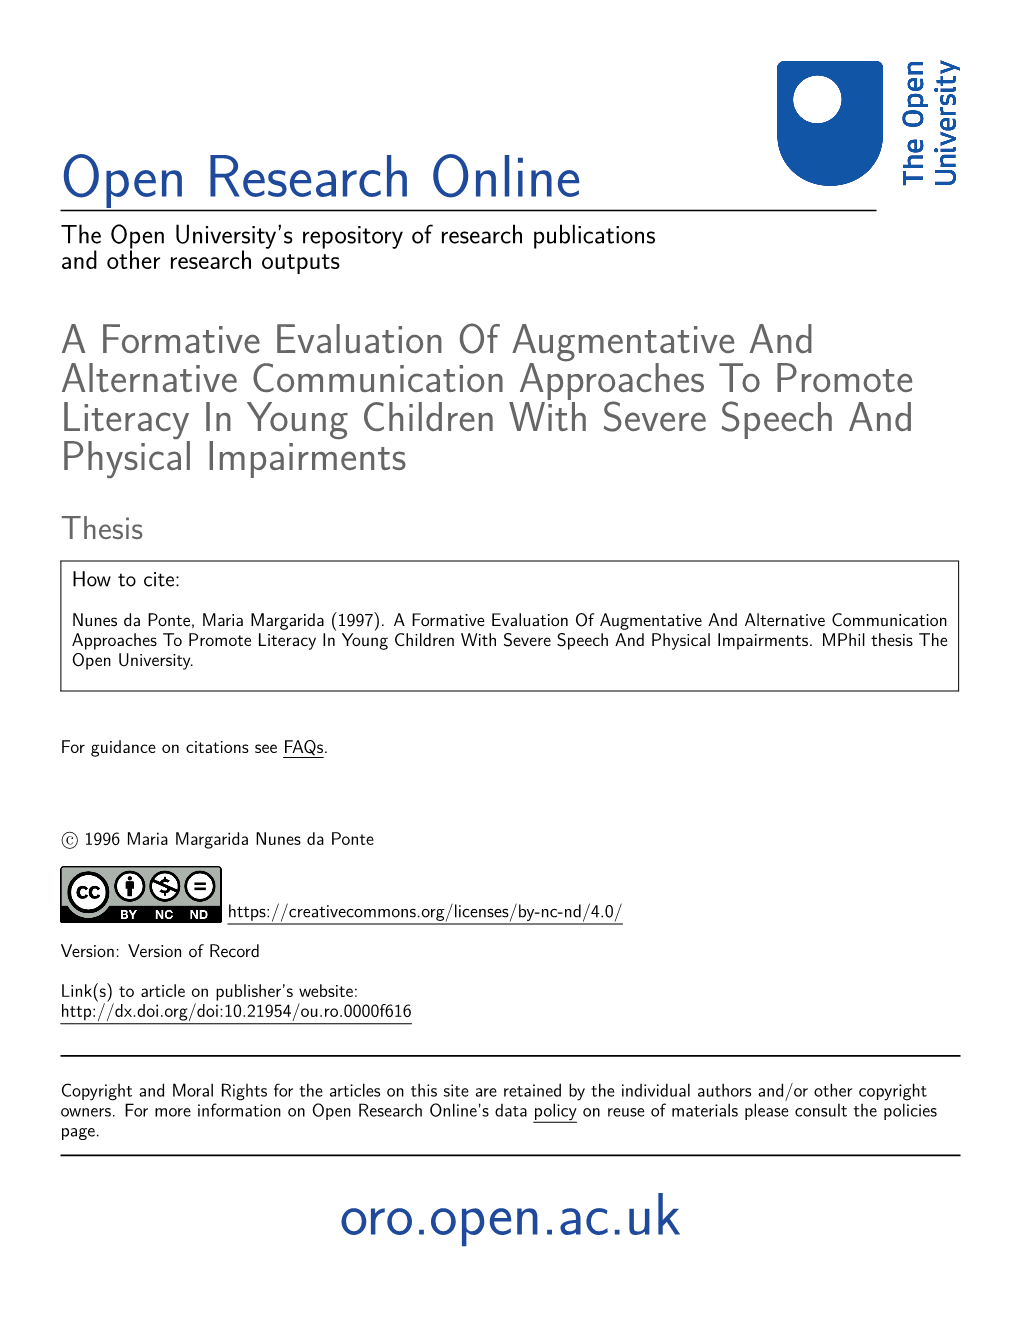 A Formative Evaluation of Augmentative and Alternative Communication Approaches to Promote Literacy in Young Children with Severe Speech and Physical Impairments